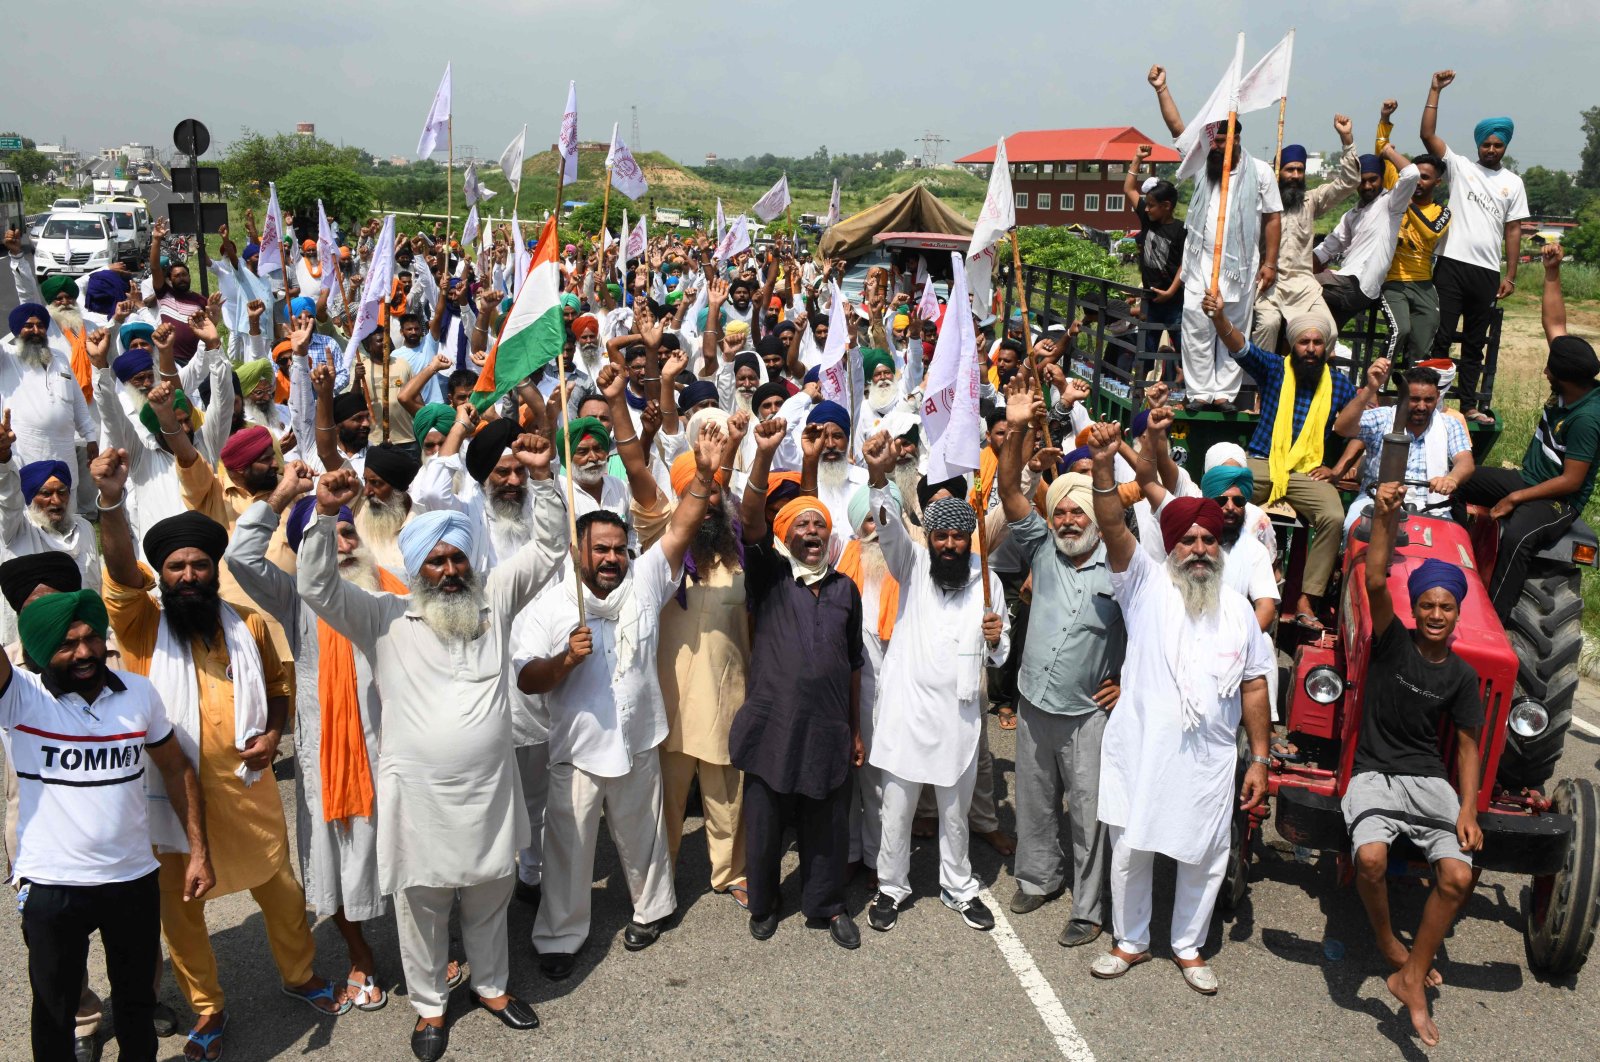 Farmers shout slogans as they make their way to Delhi to join farmers who are continuing their protest against the central government's agricultural reforms, in Beas town of India's Punjab state on Sept. 5, 2021. (AFP Photo)